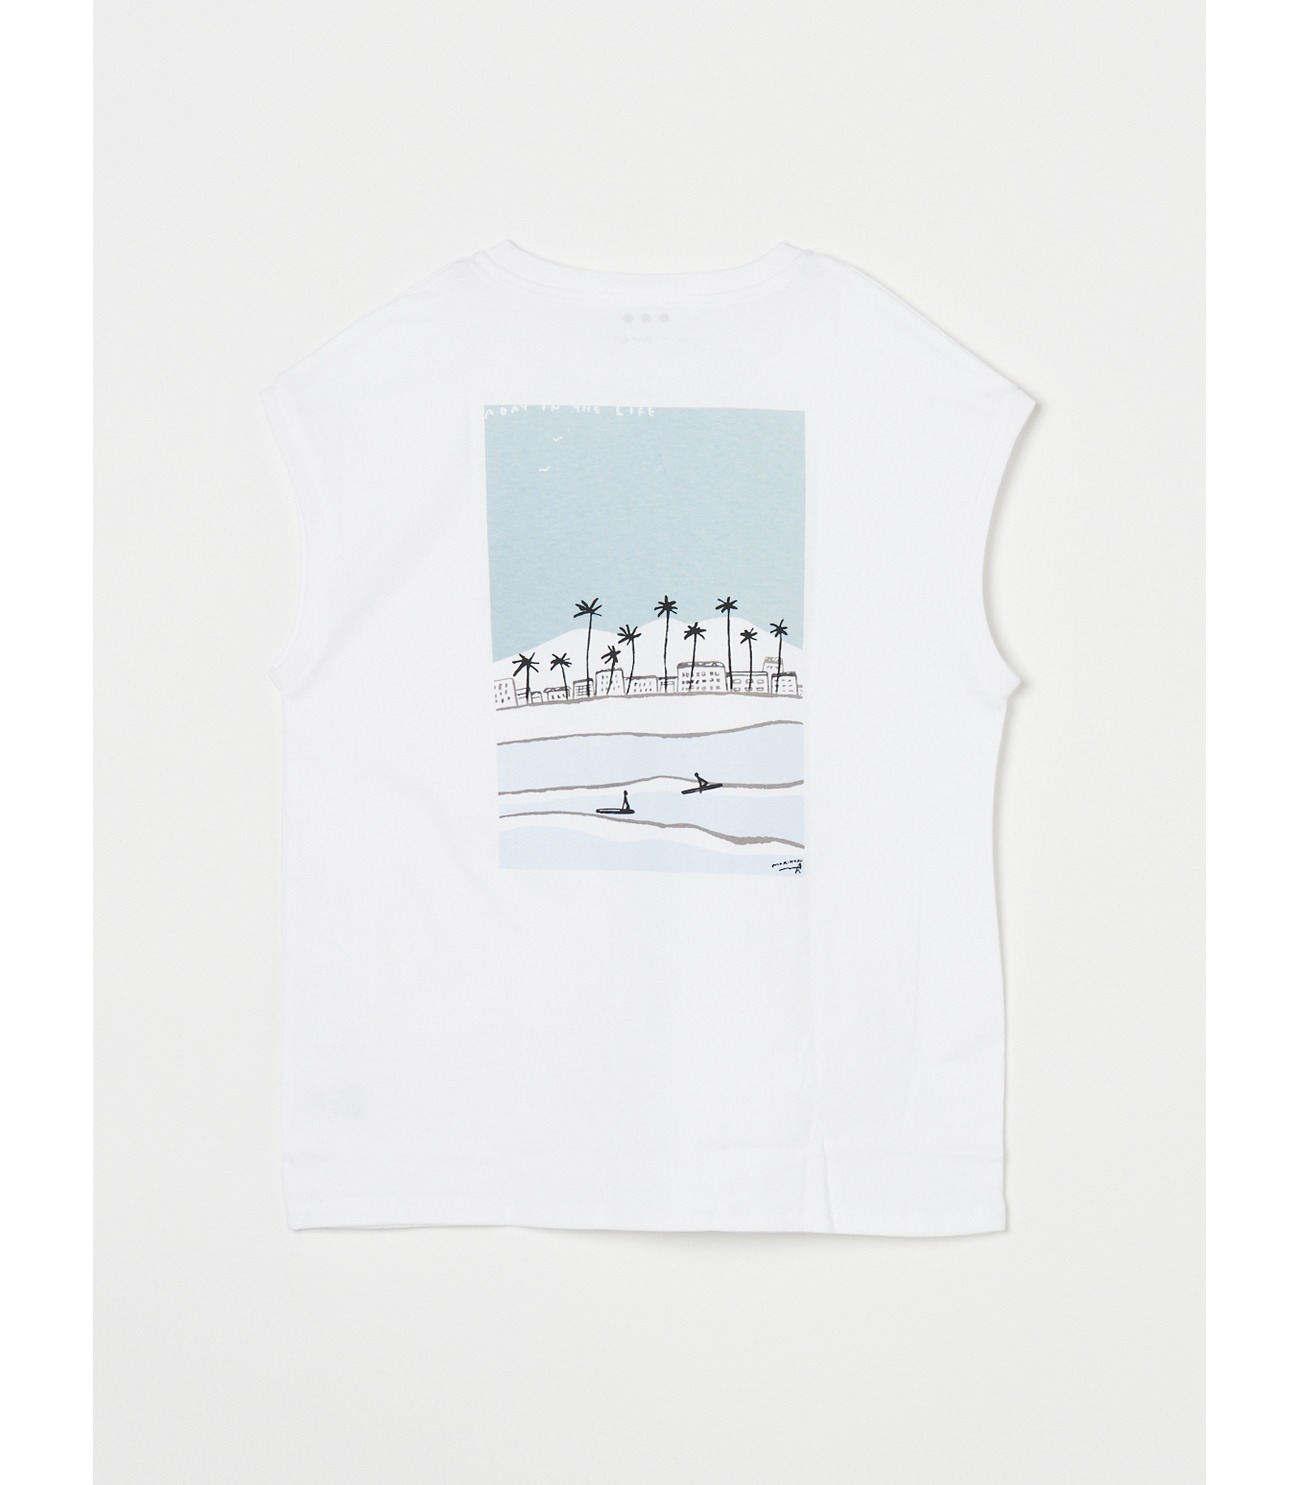 Graphic tee1 tank 詳細画像 a day in the sun 1